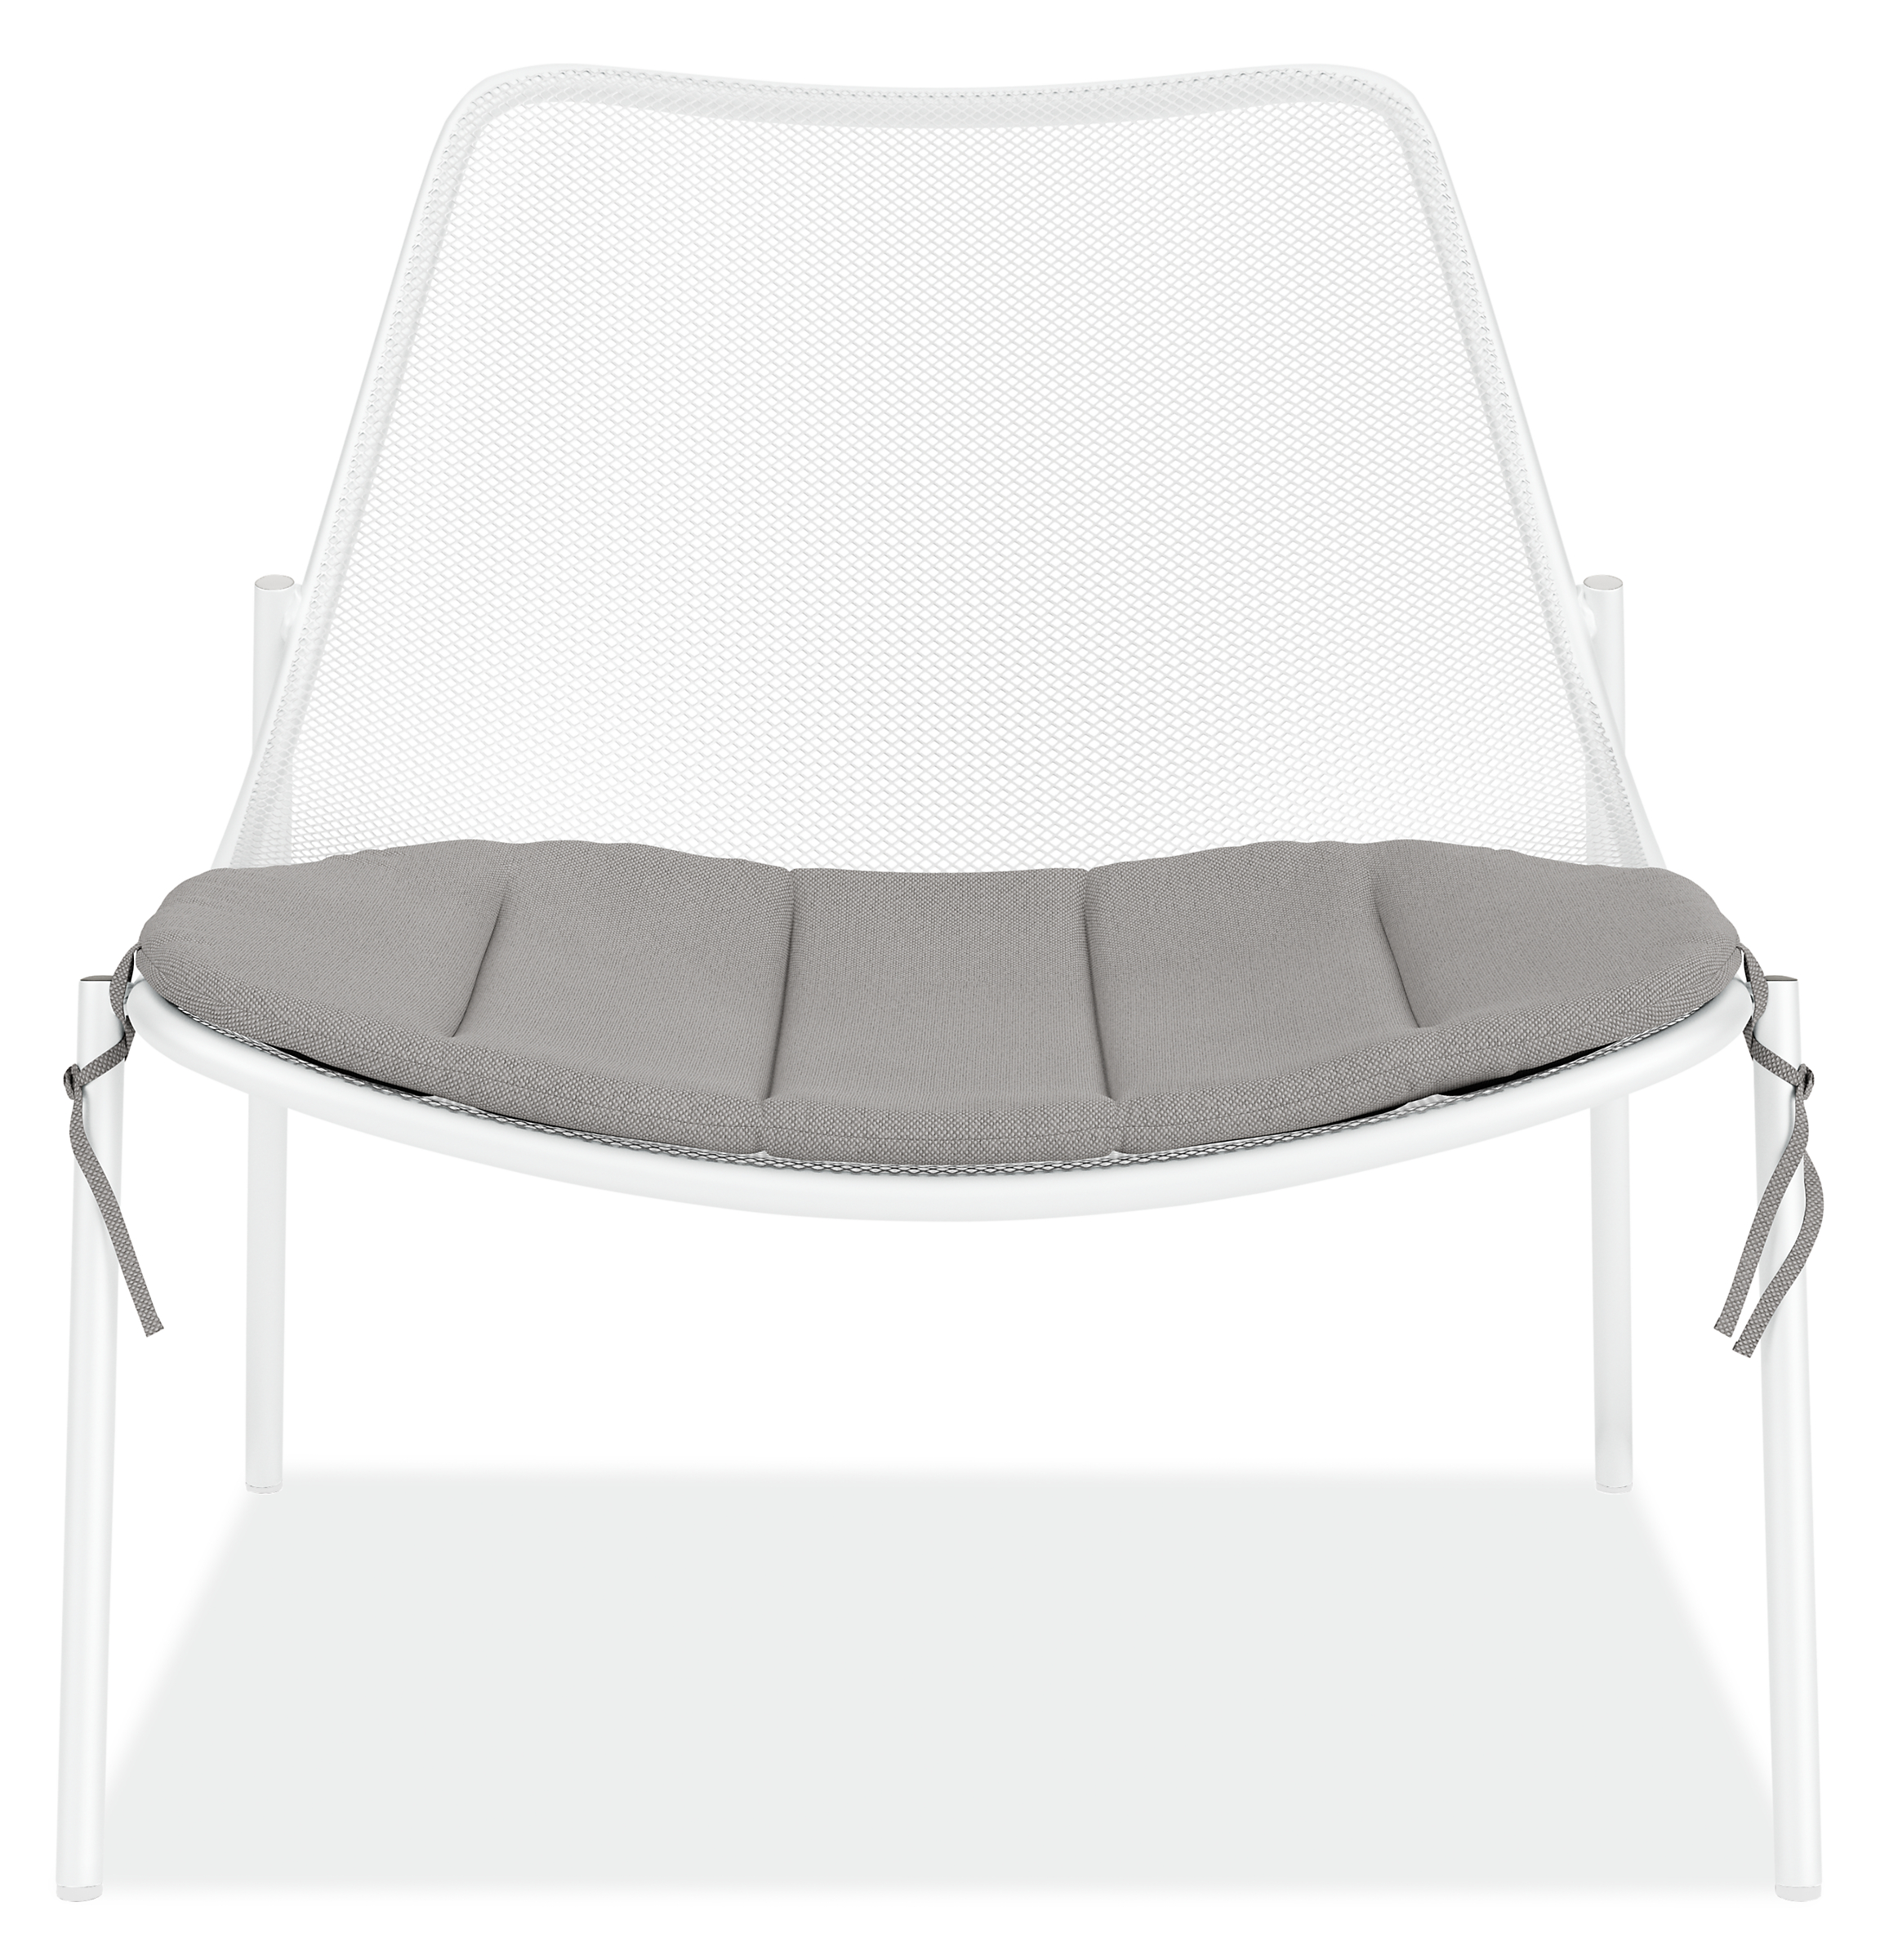 Front view of Soleil Lounge Chair with Cushion in Pelham Smoke.